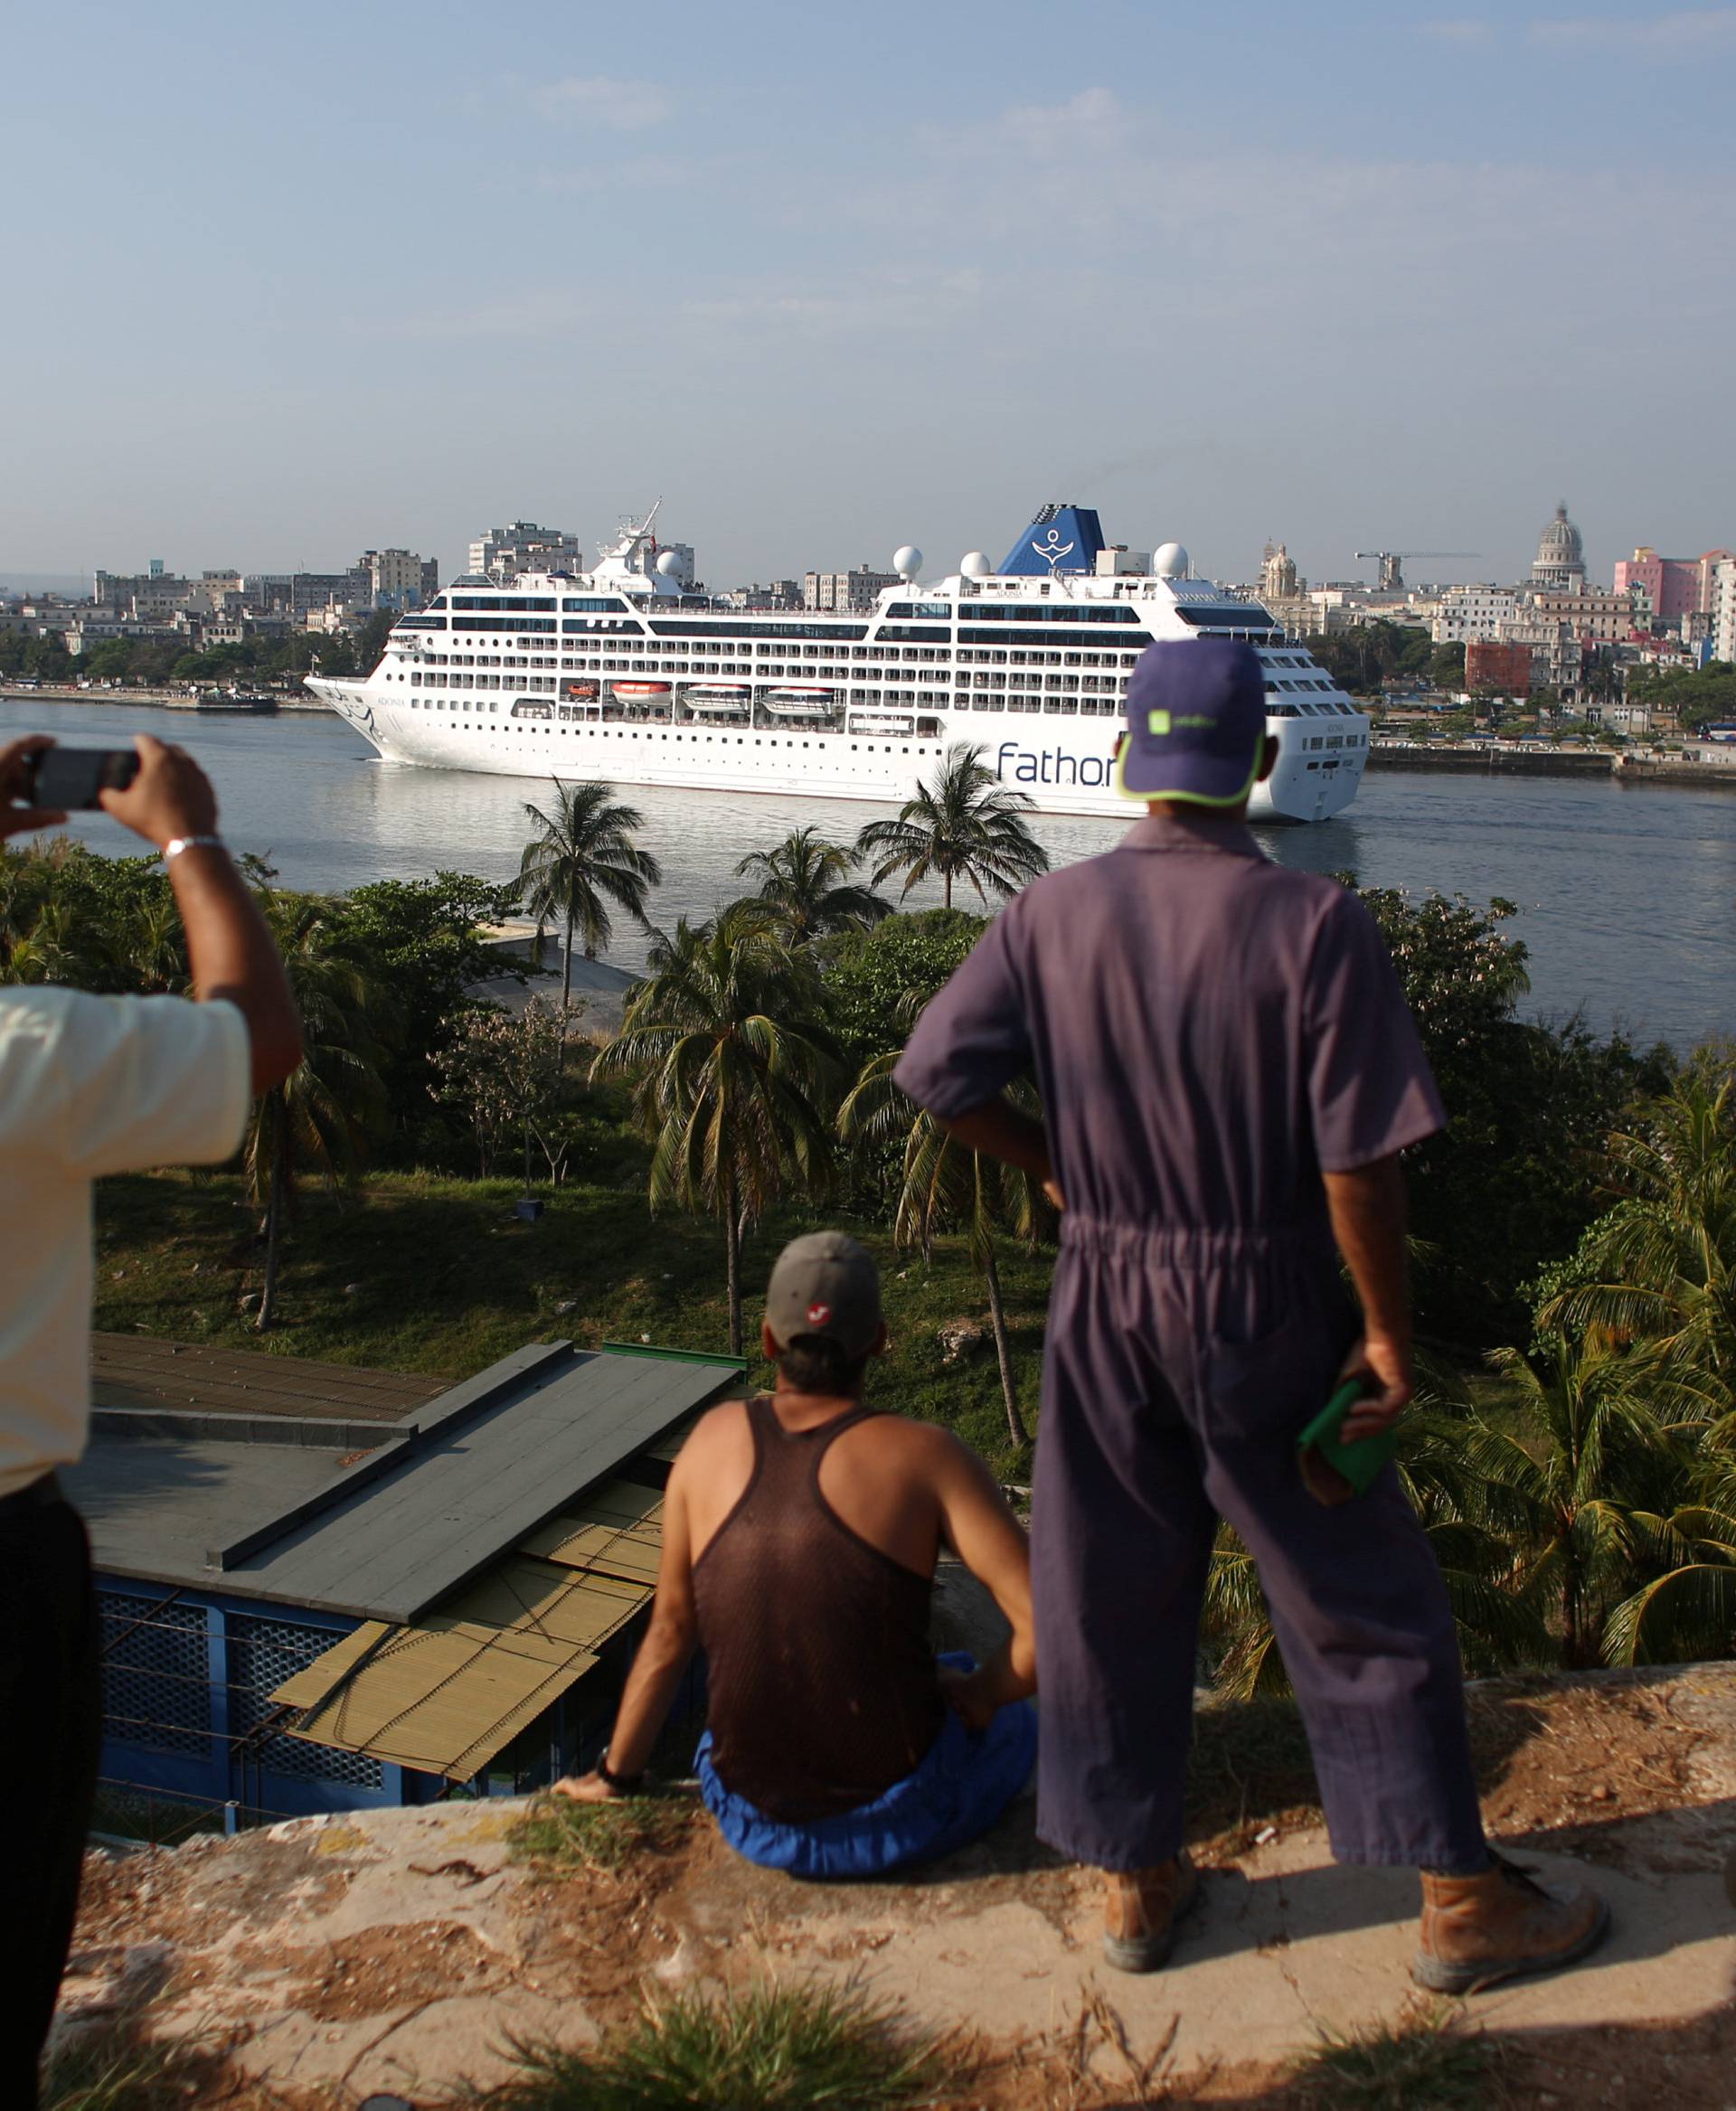 People look at the arrival of U.S. Carnival cruise ship Adonia at the Havana bay, the first cruise liner to sail between the United States and Cuba since Cuba's 1959 revolution, Cuba